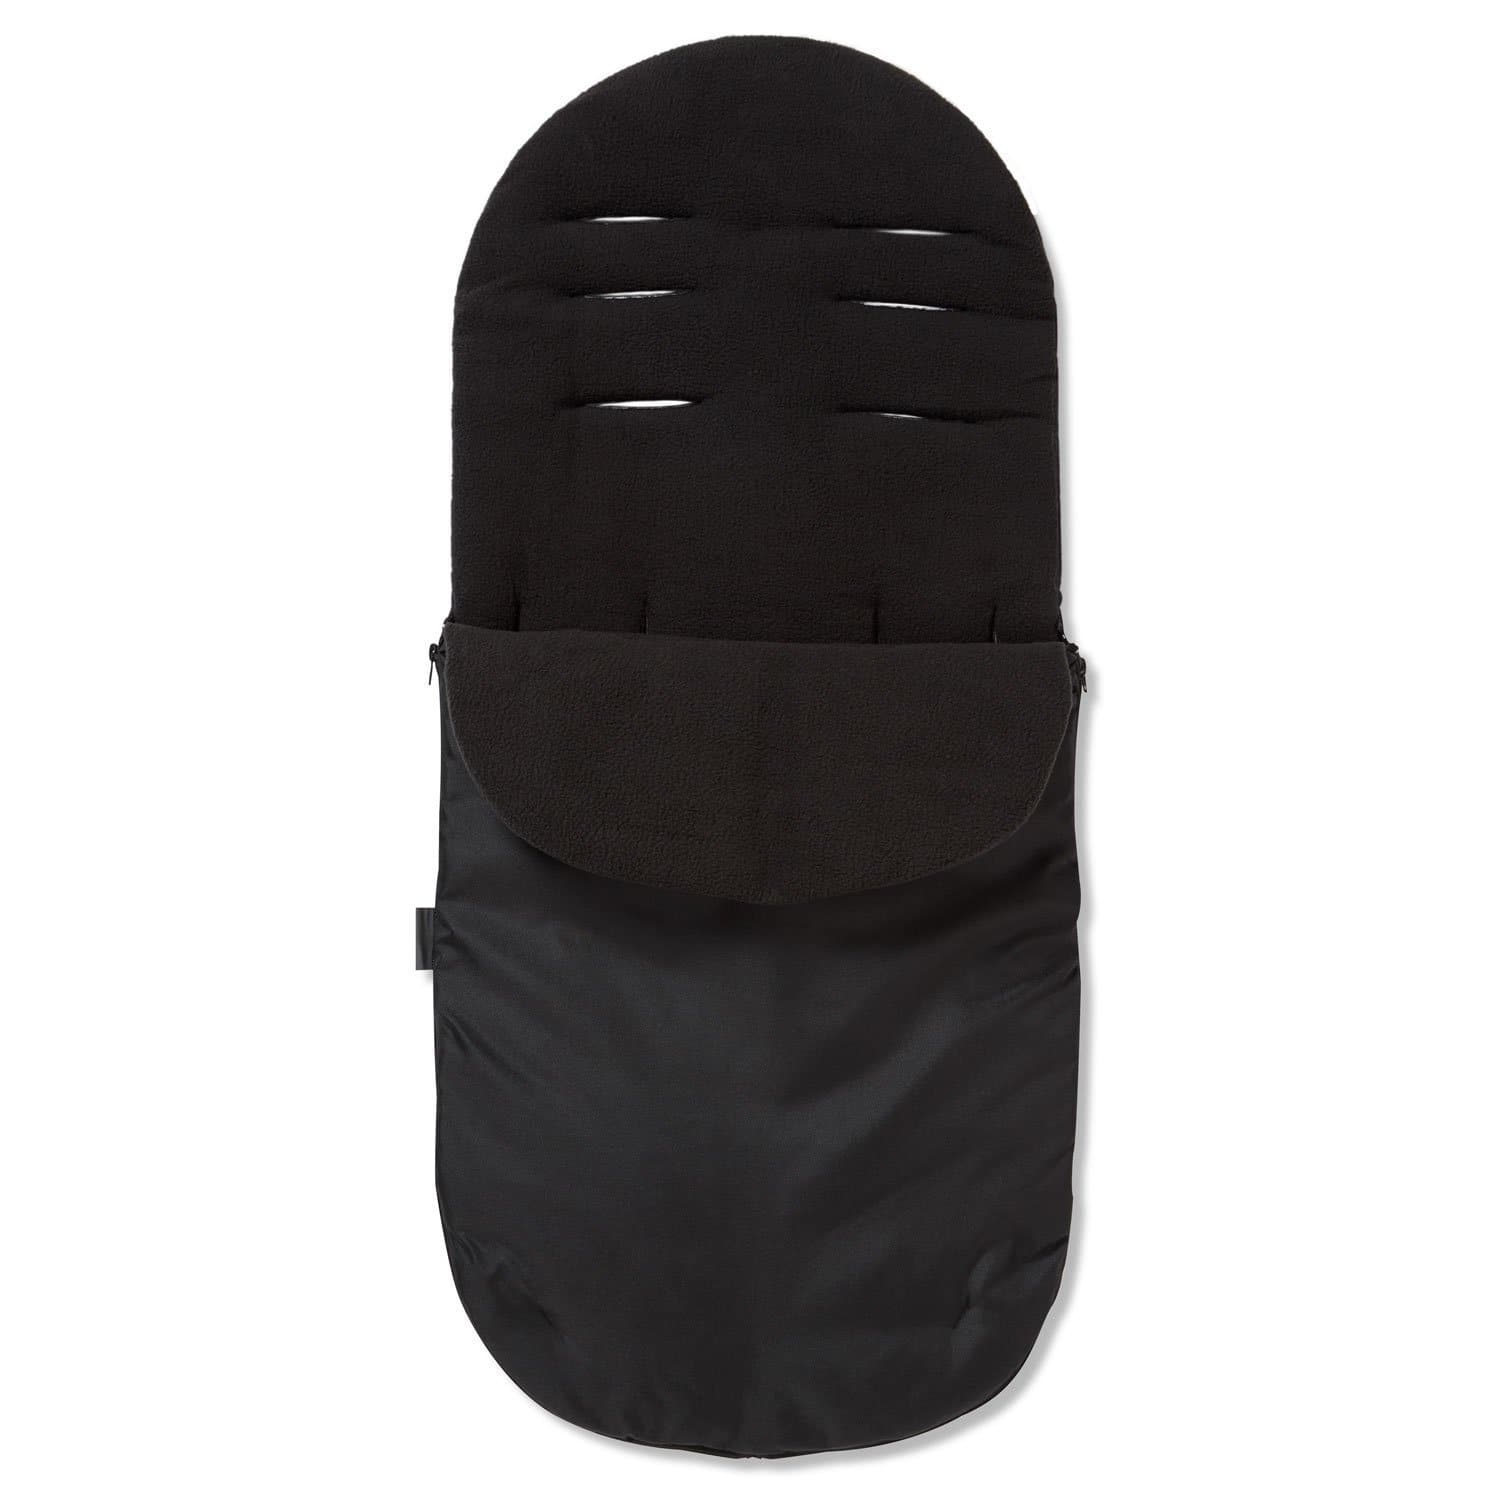 Footmuff / Cosy Toes Compatible with Kiddy - Black / Fits All Models | For Your Little One